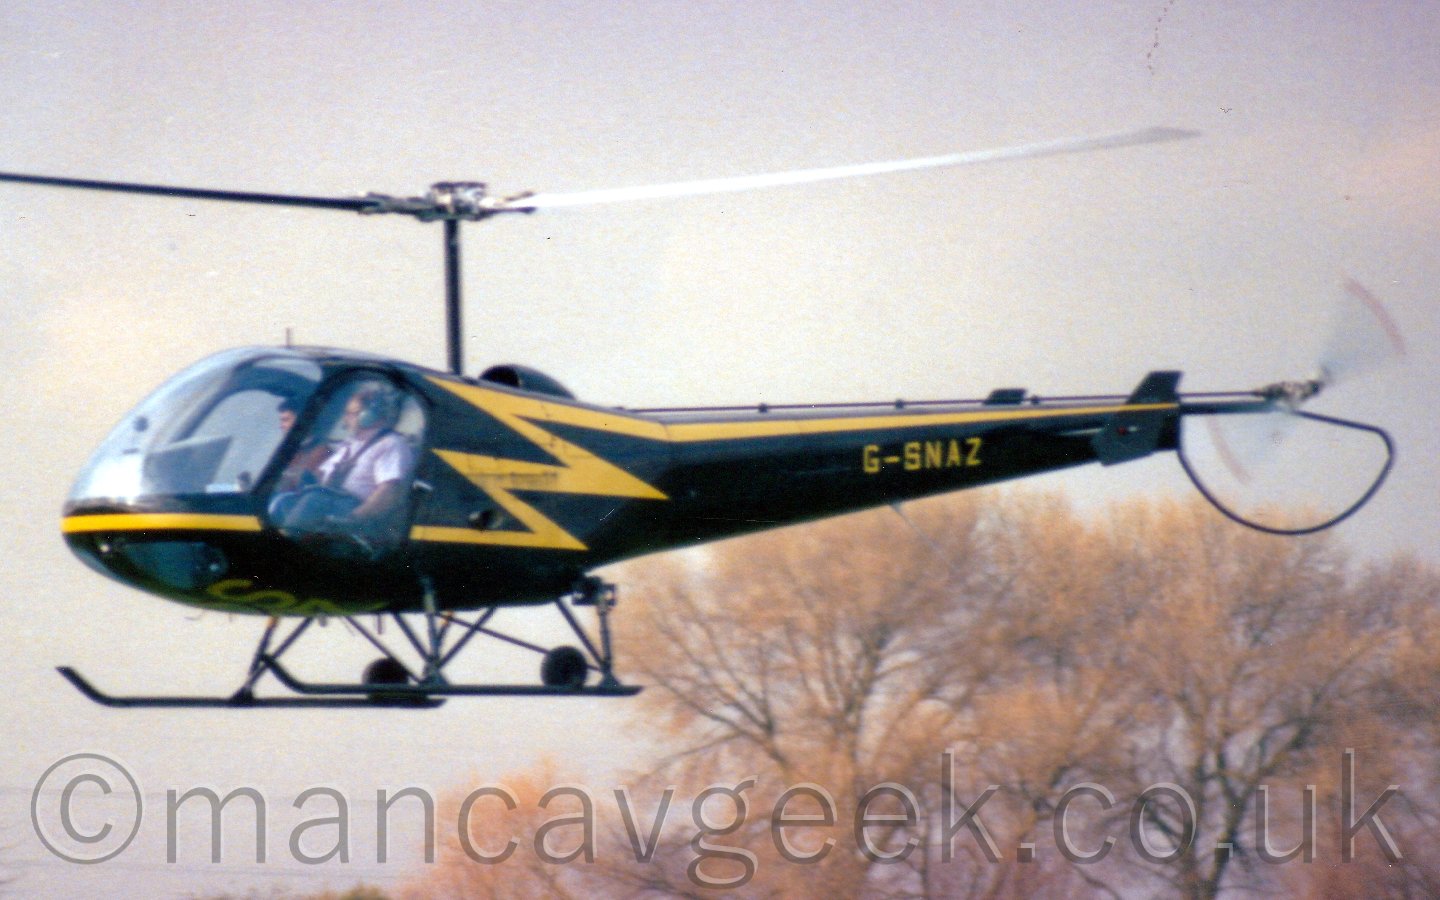 Side view of a helicopter flying from right to left at low altitude. the helicopter is black, with a yellow stripe running along the body, turning into a lightning boltas it moves to the top, then running straight along the tail boom to the tail rotor. The highly glazed cockpit has two people inside. Behind, there are some trees behind the helicopter, with grey sky beyond that.